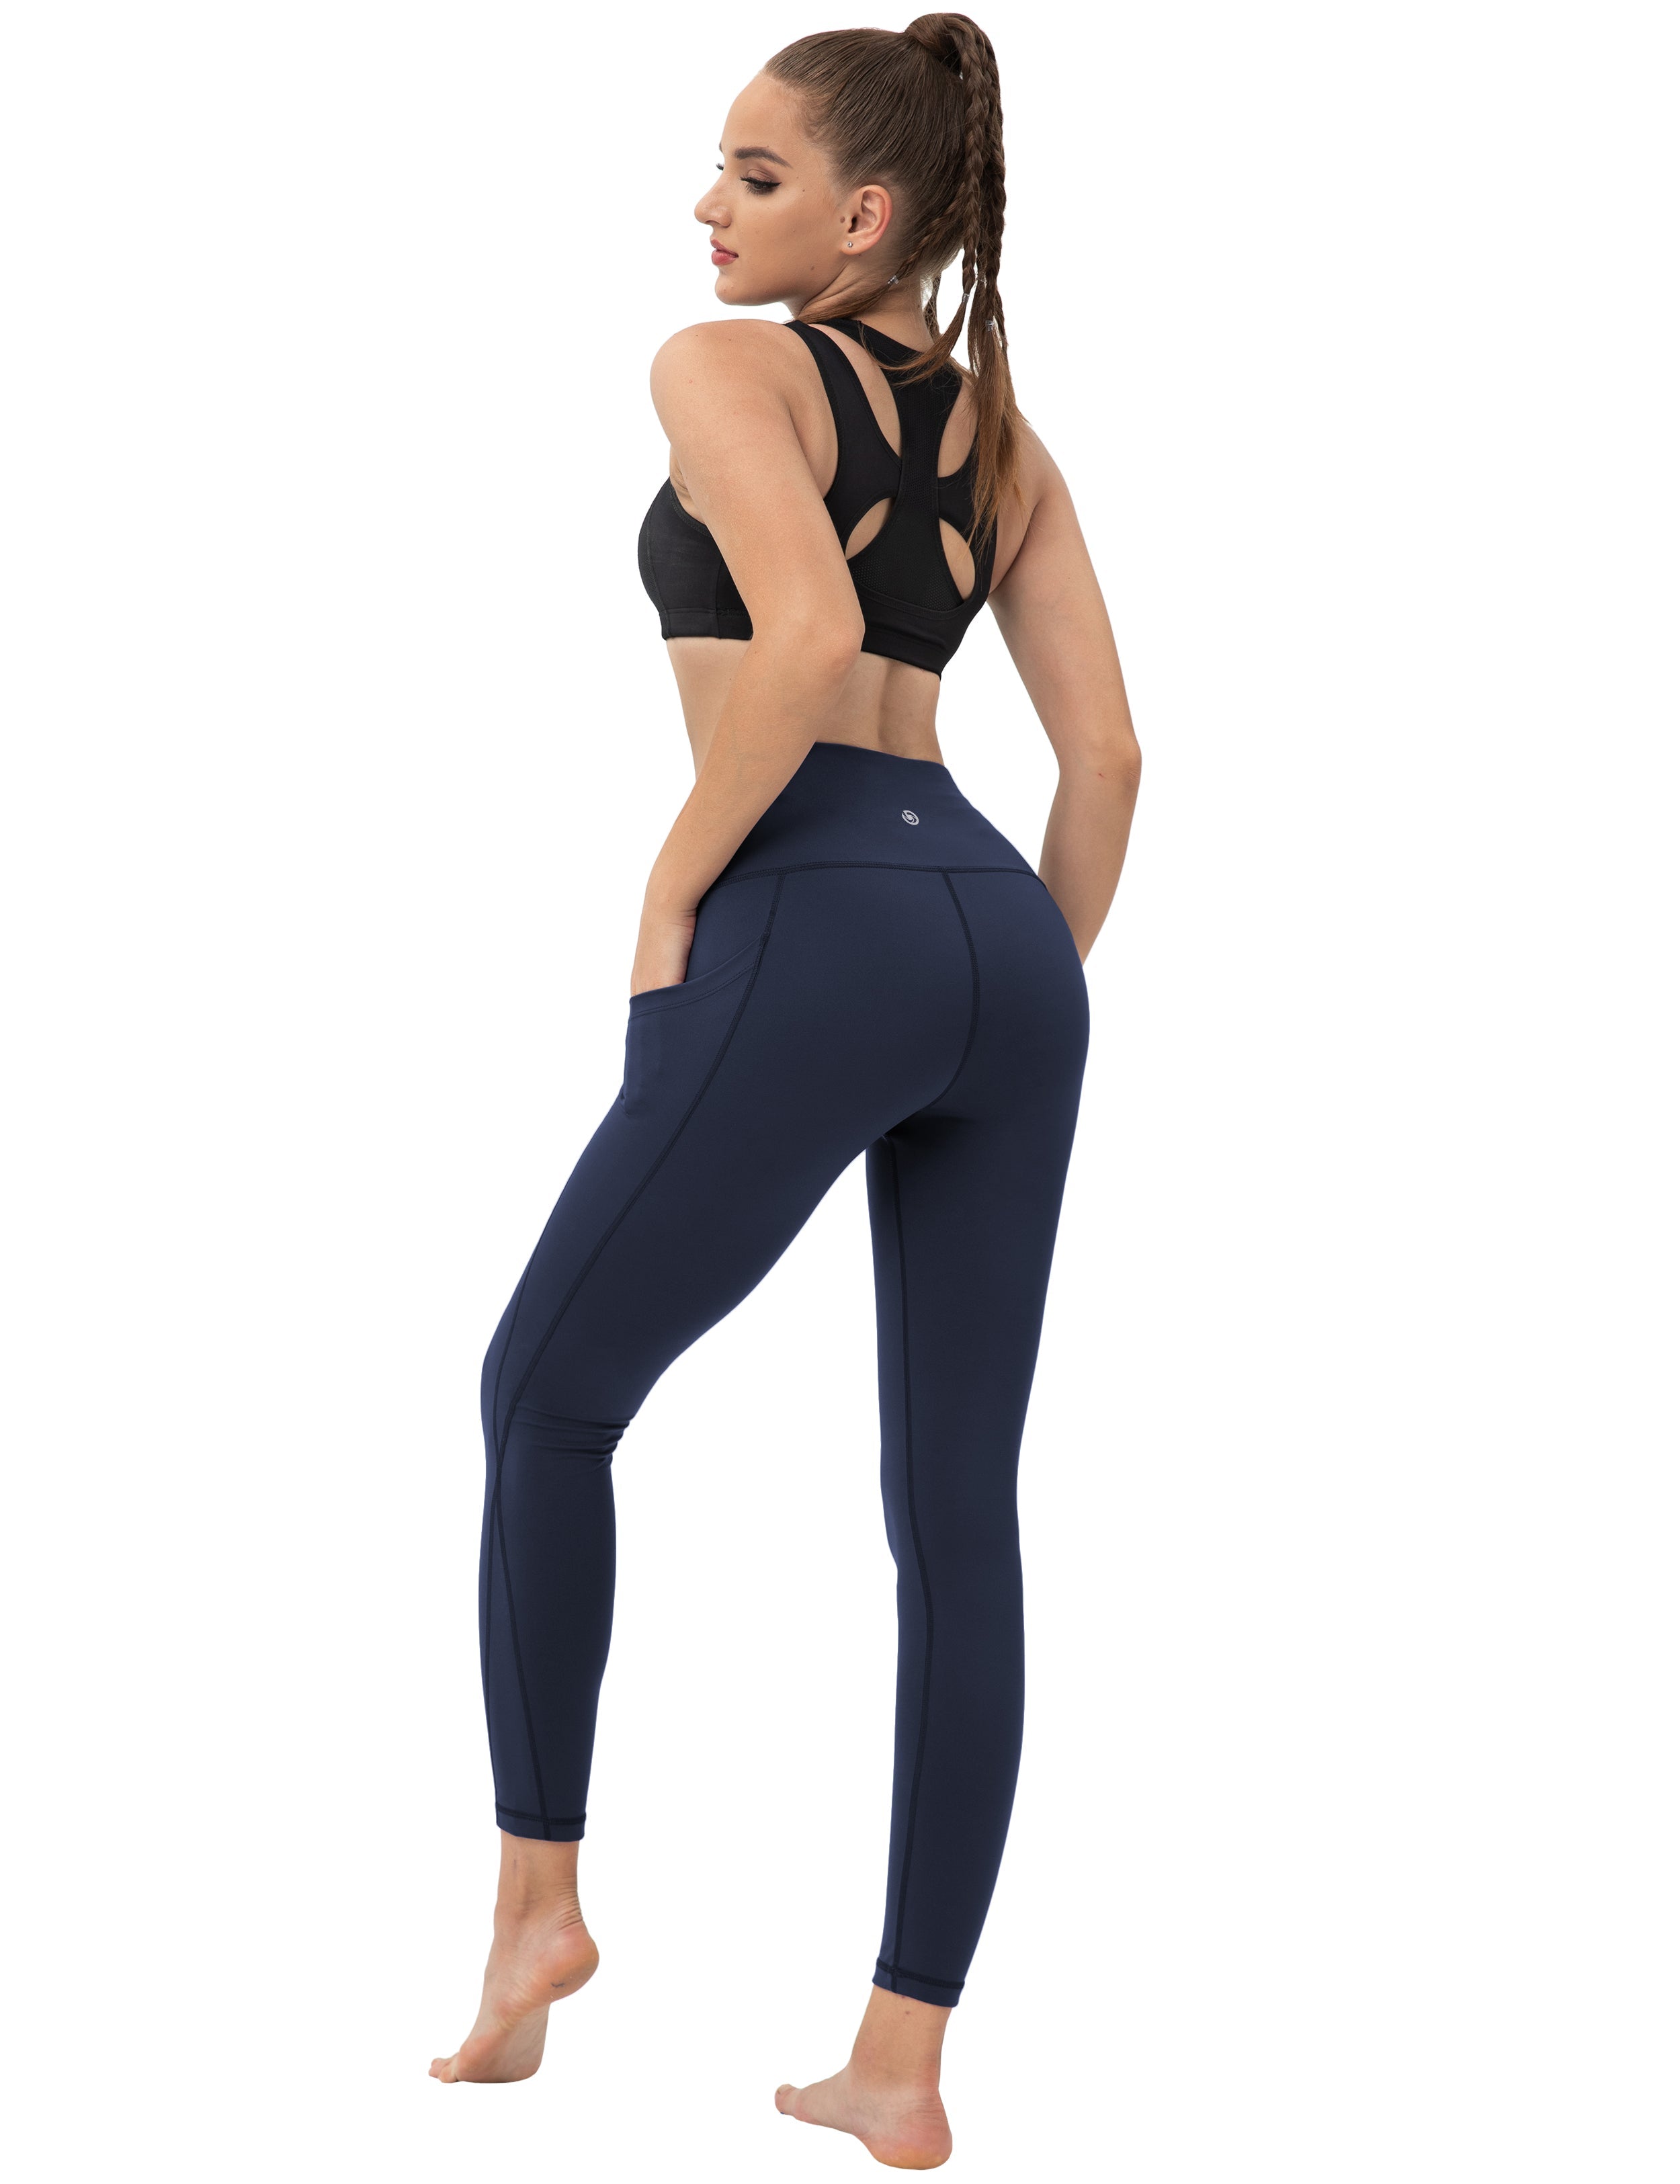 High Waist Side Pockets Golf Pants darknavy 75% Nylon, 25% Spandex Fabric doesn't attract lint easily 4-way stretch No see-through Moisture-wicking Tummy control Inner pocket